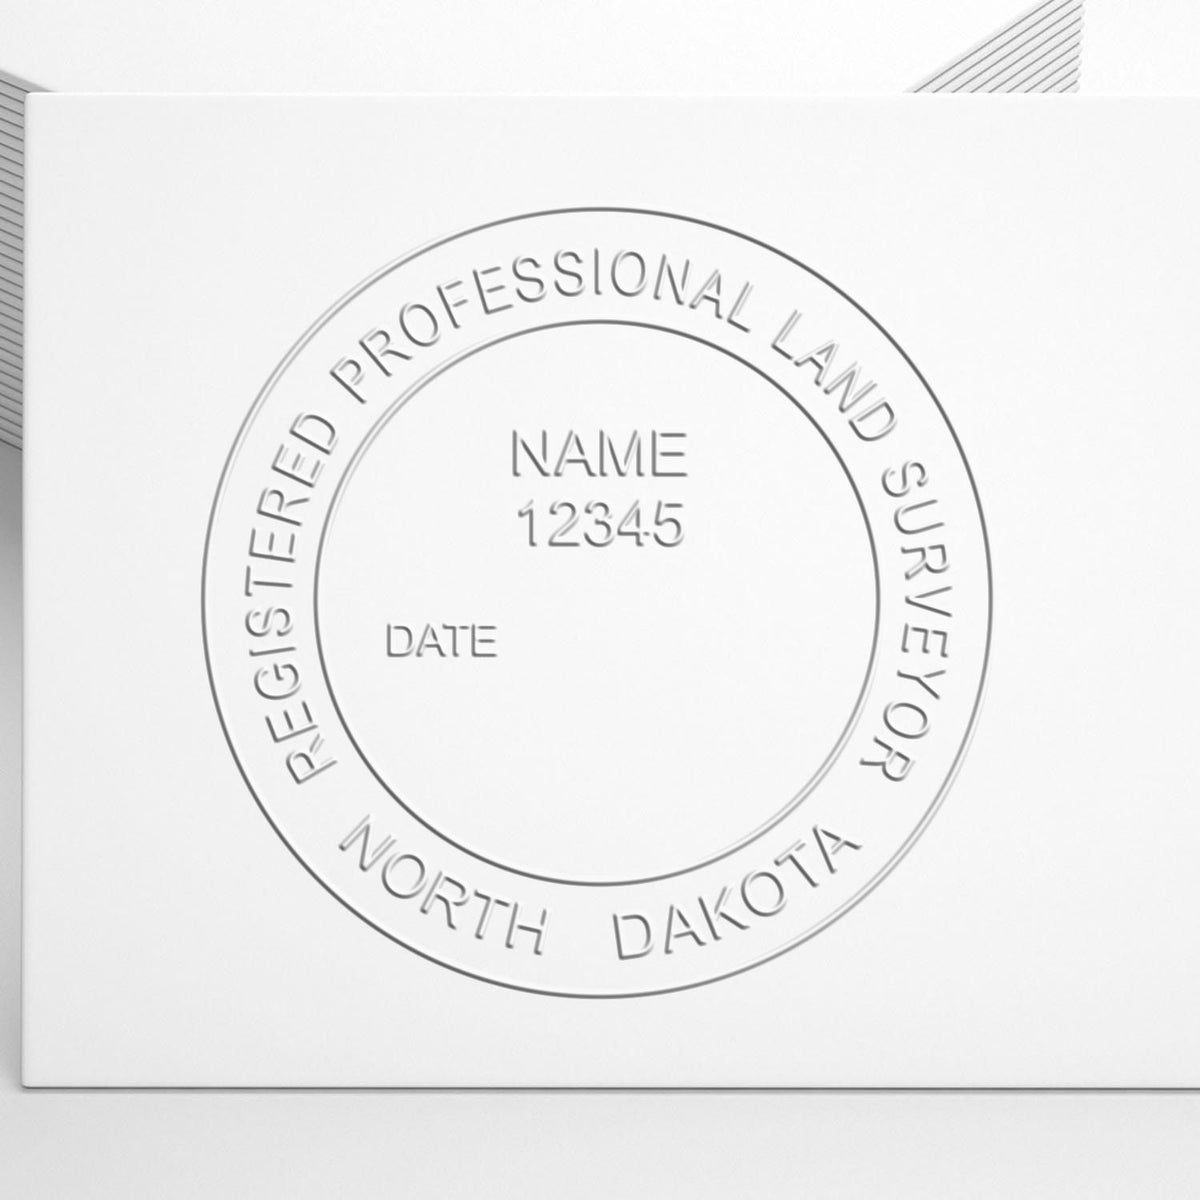 A photograph of the State of North Dakota Soft Land Surveyor Embossing Seal stamp impression reveals a vivid, professional image of the on paper.